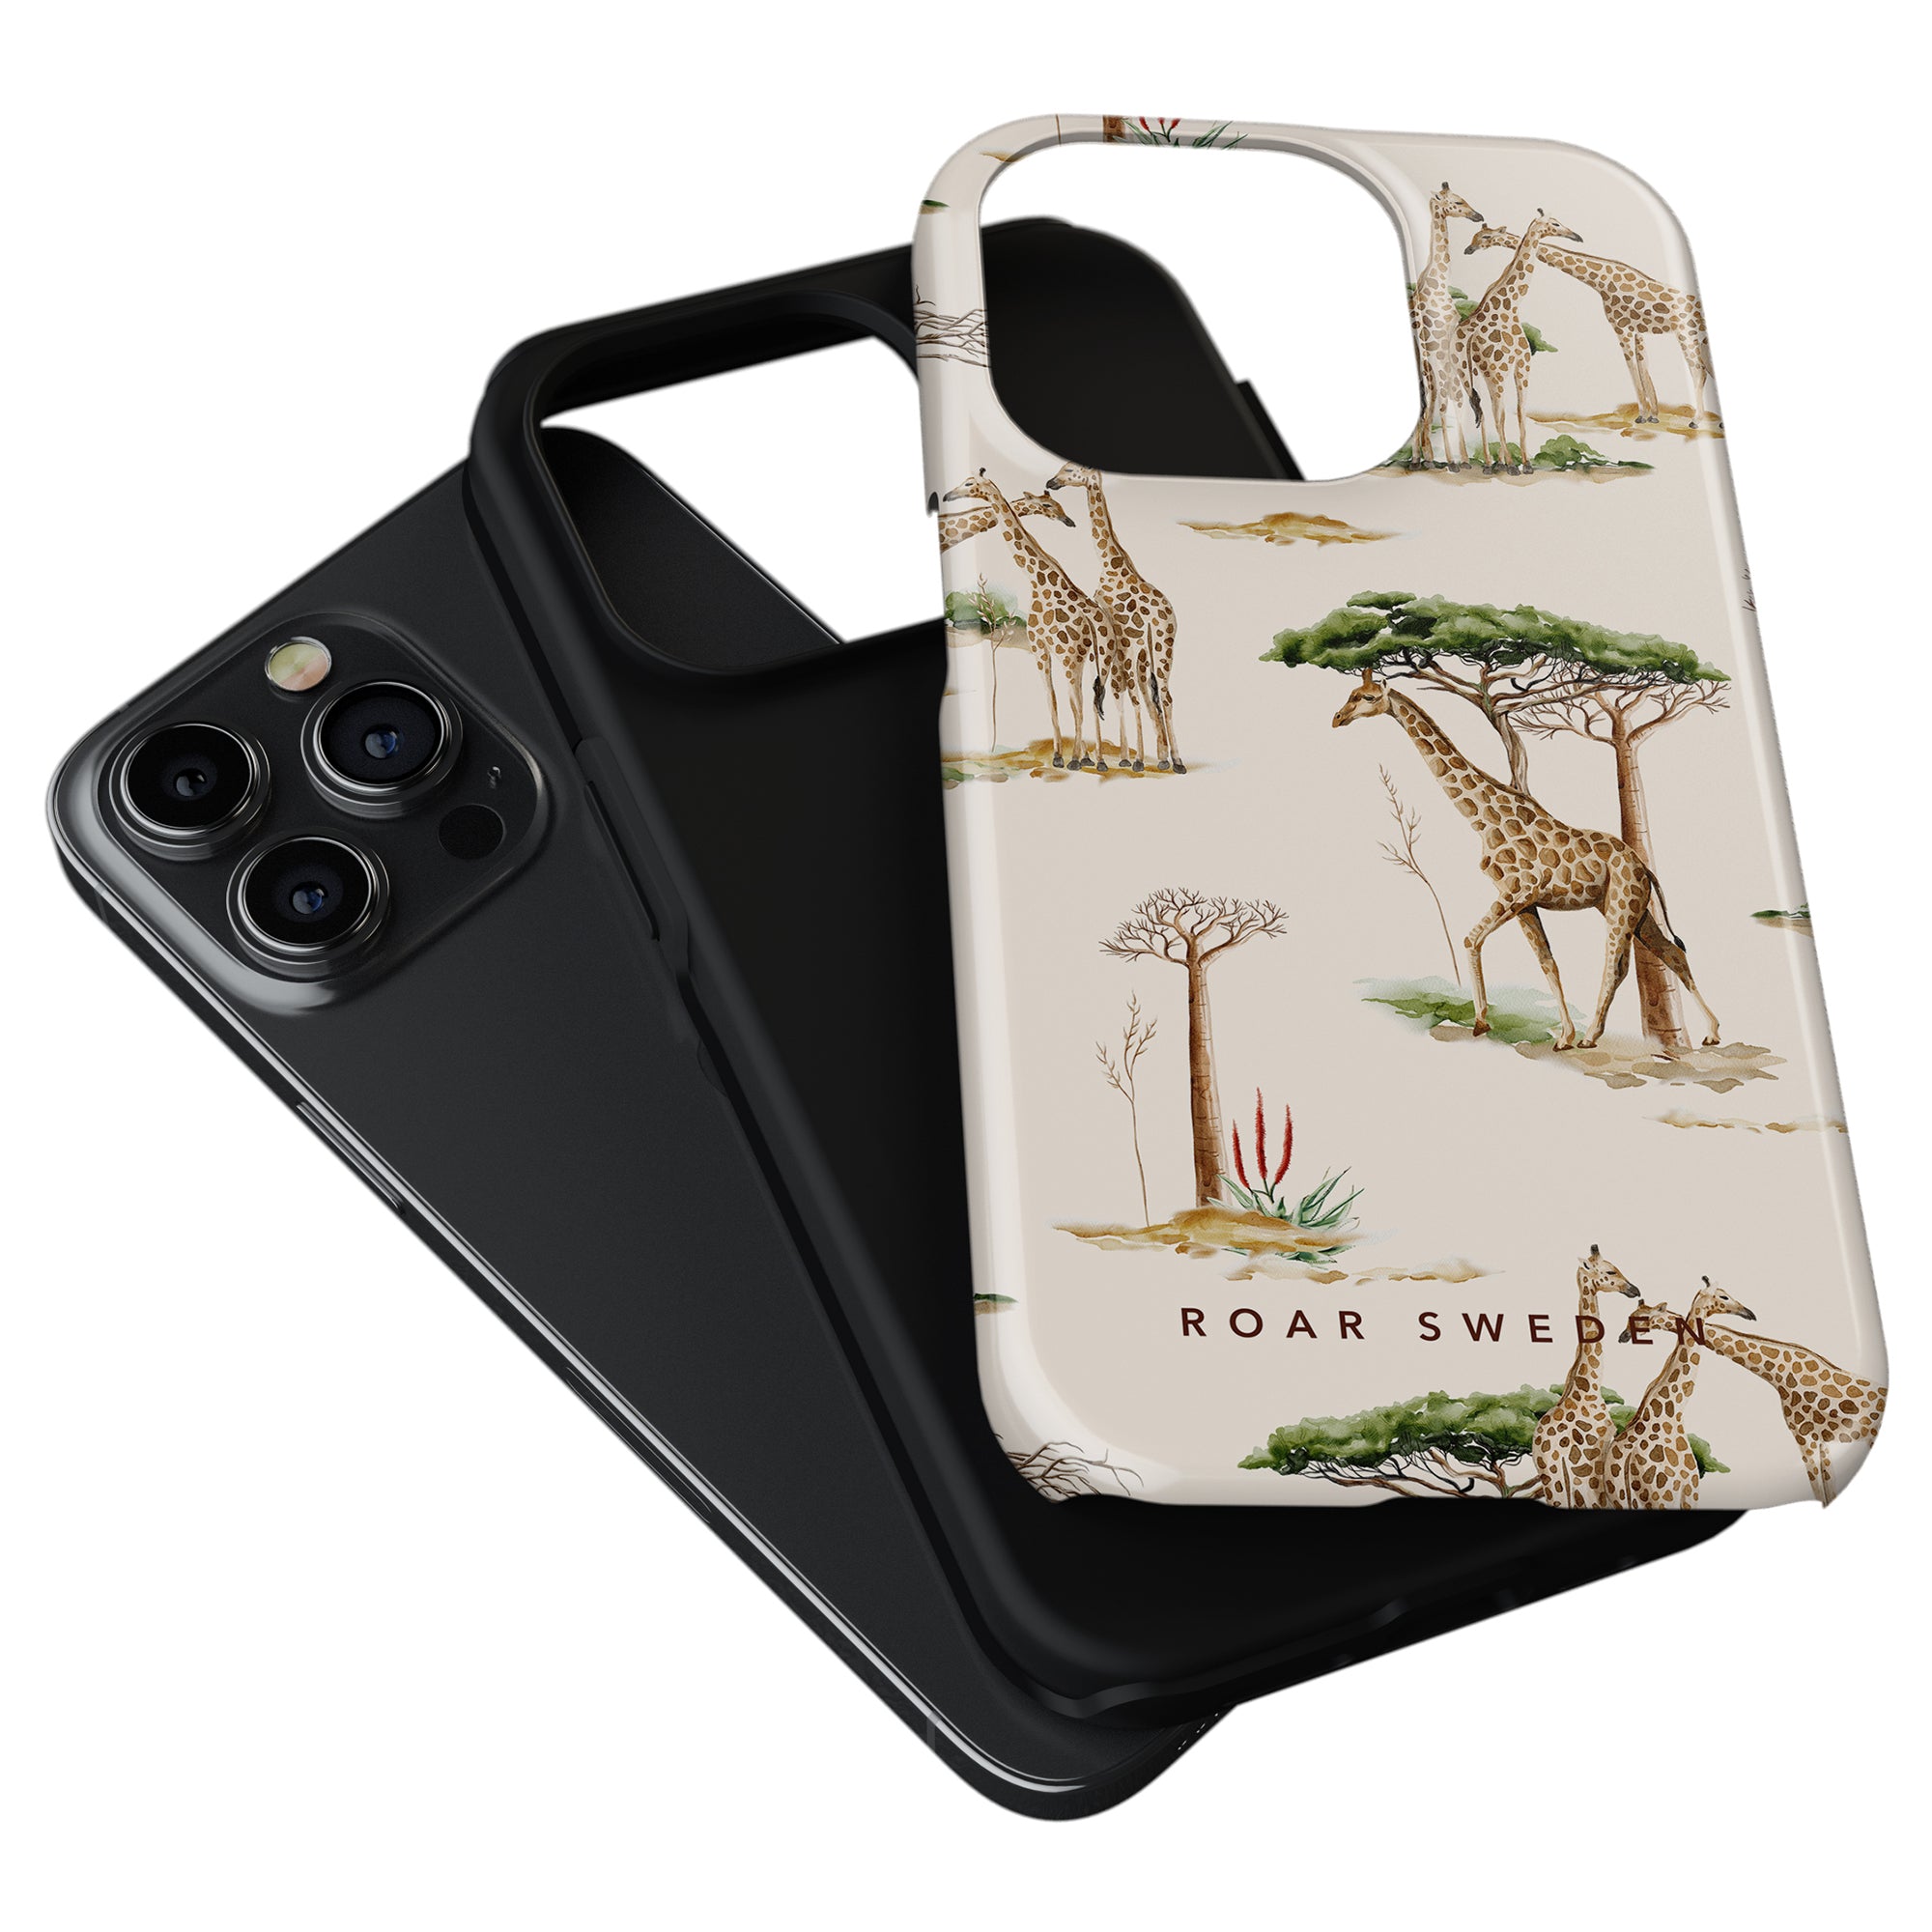 Two phone cases, one black and one with a giraffe print design from our Safari Collection, are stacked on top of each other. The bottom case features the text "ROAR SWEET." This Giraffa - Tough Case offers both style and durability for your mobile needs.